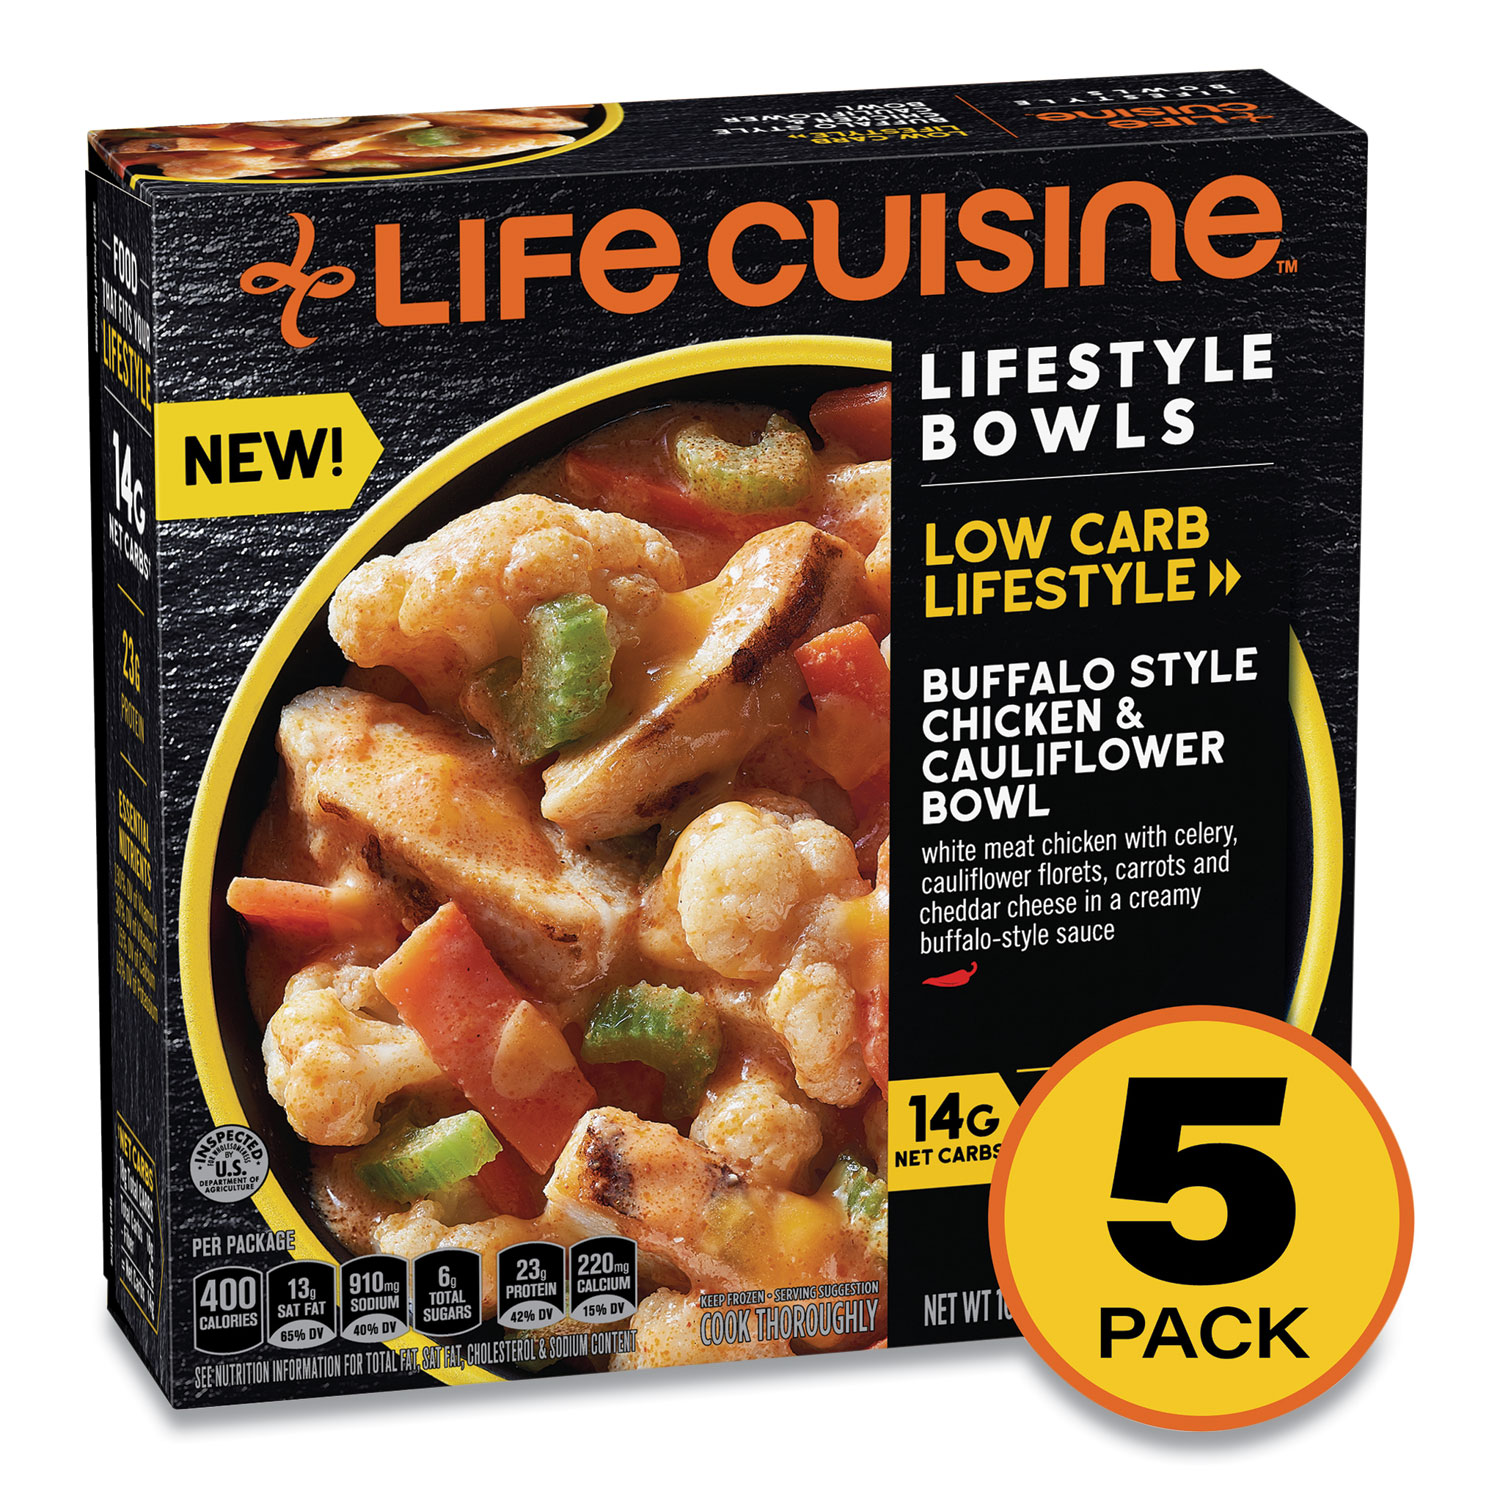  Life Cuisine 12425971 Low Carb Lifestyle Buffalo Style Chicken and Cauliflower Bowl, 10 oz Bowl, 5/Pack, Free Delivery in 1-4 Business Days (GRR90300200) 